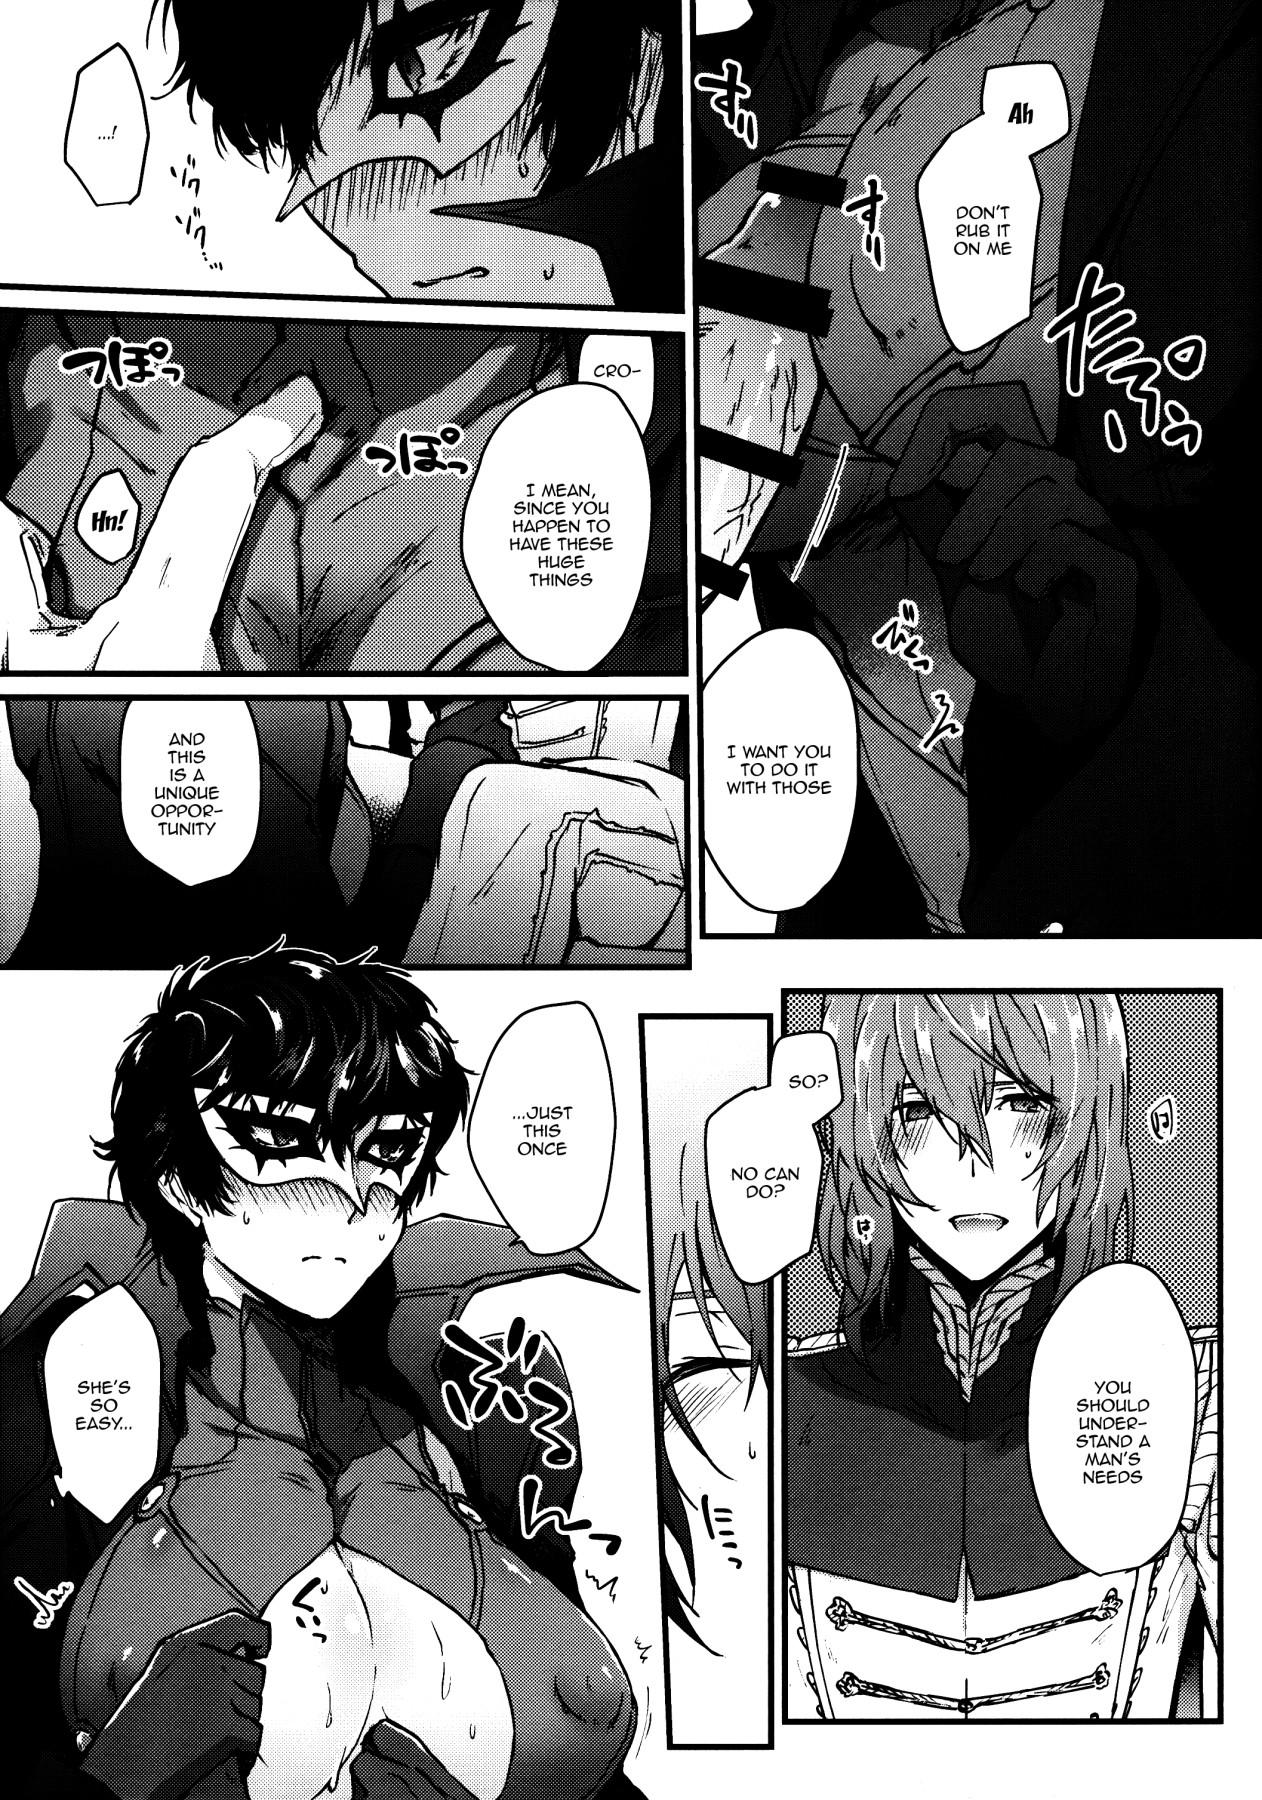 Asses JNK - Persona 5 Shoplifter - Page 8